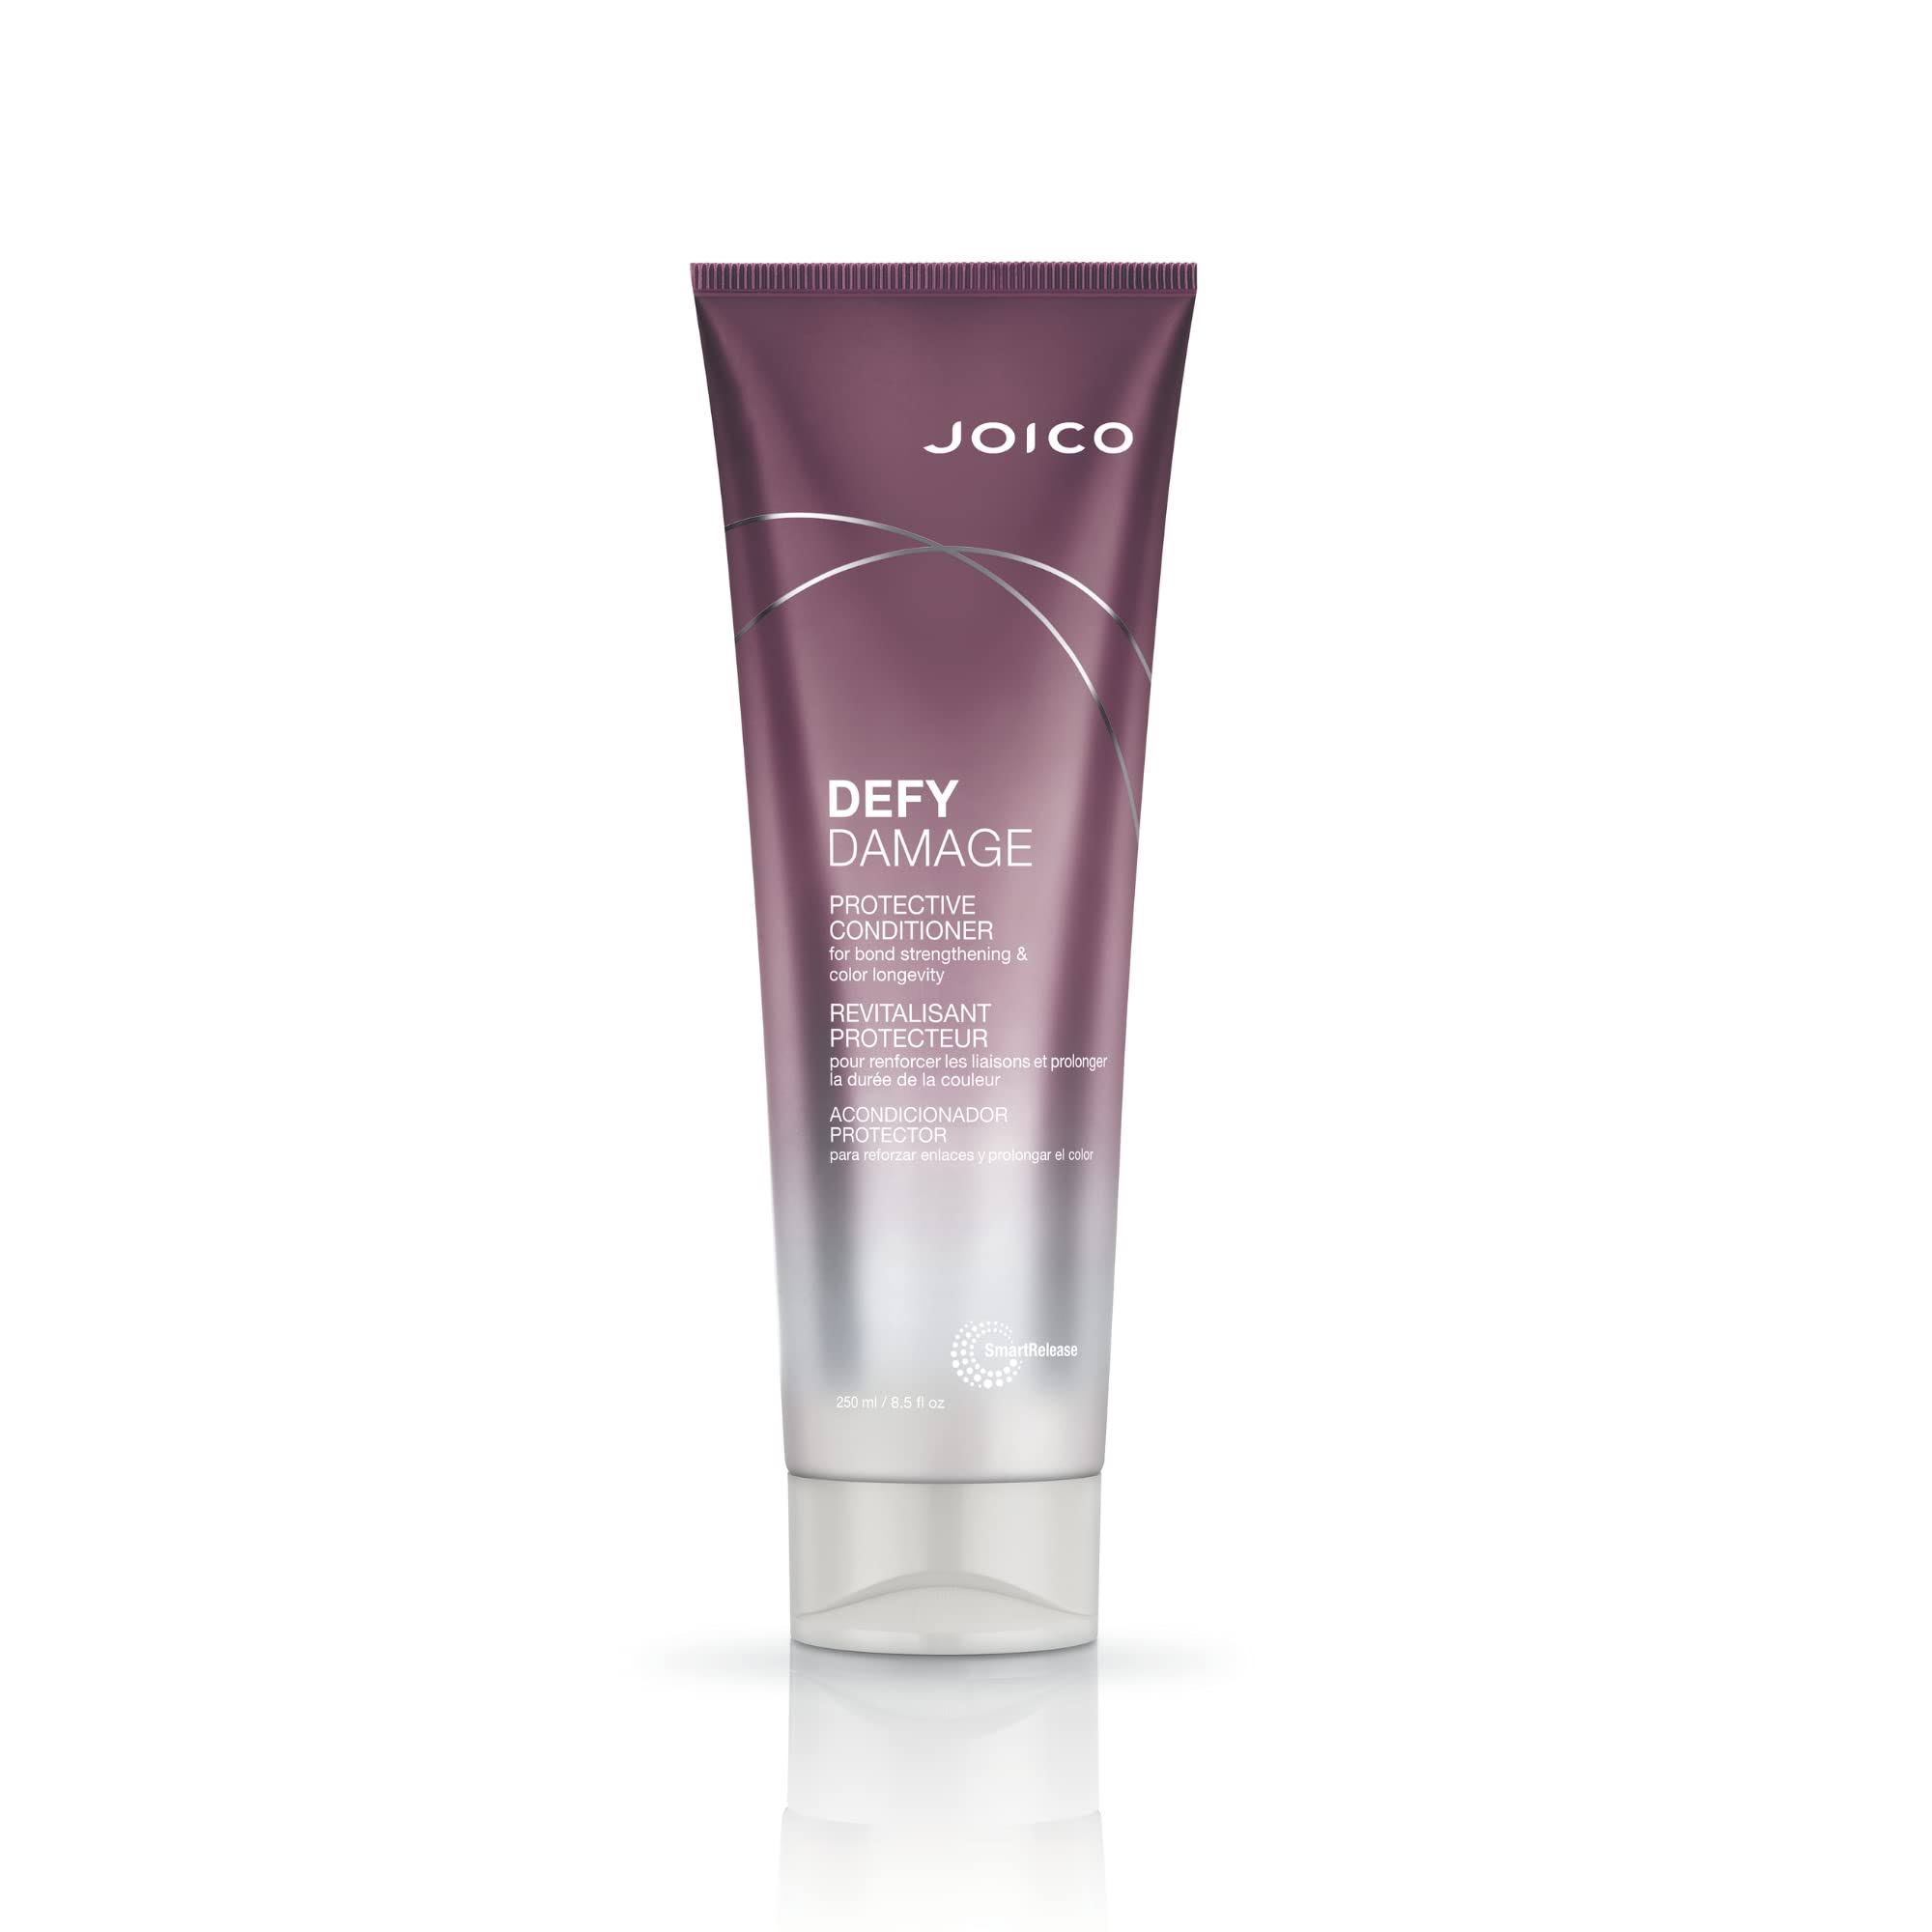 Joico Protective Conditioner, Defy Damage - 250 ml